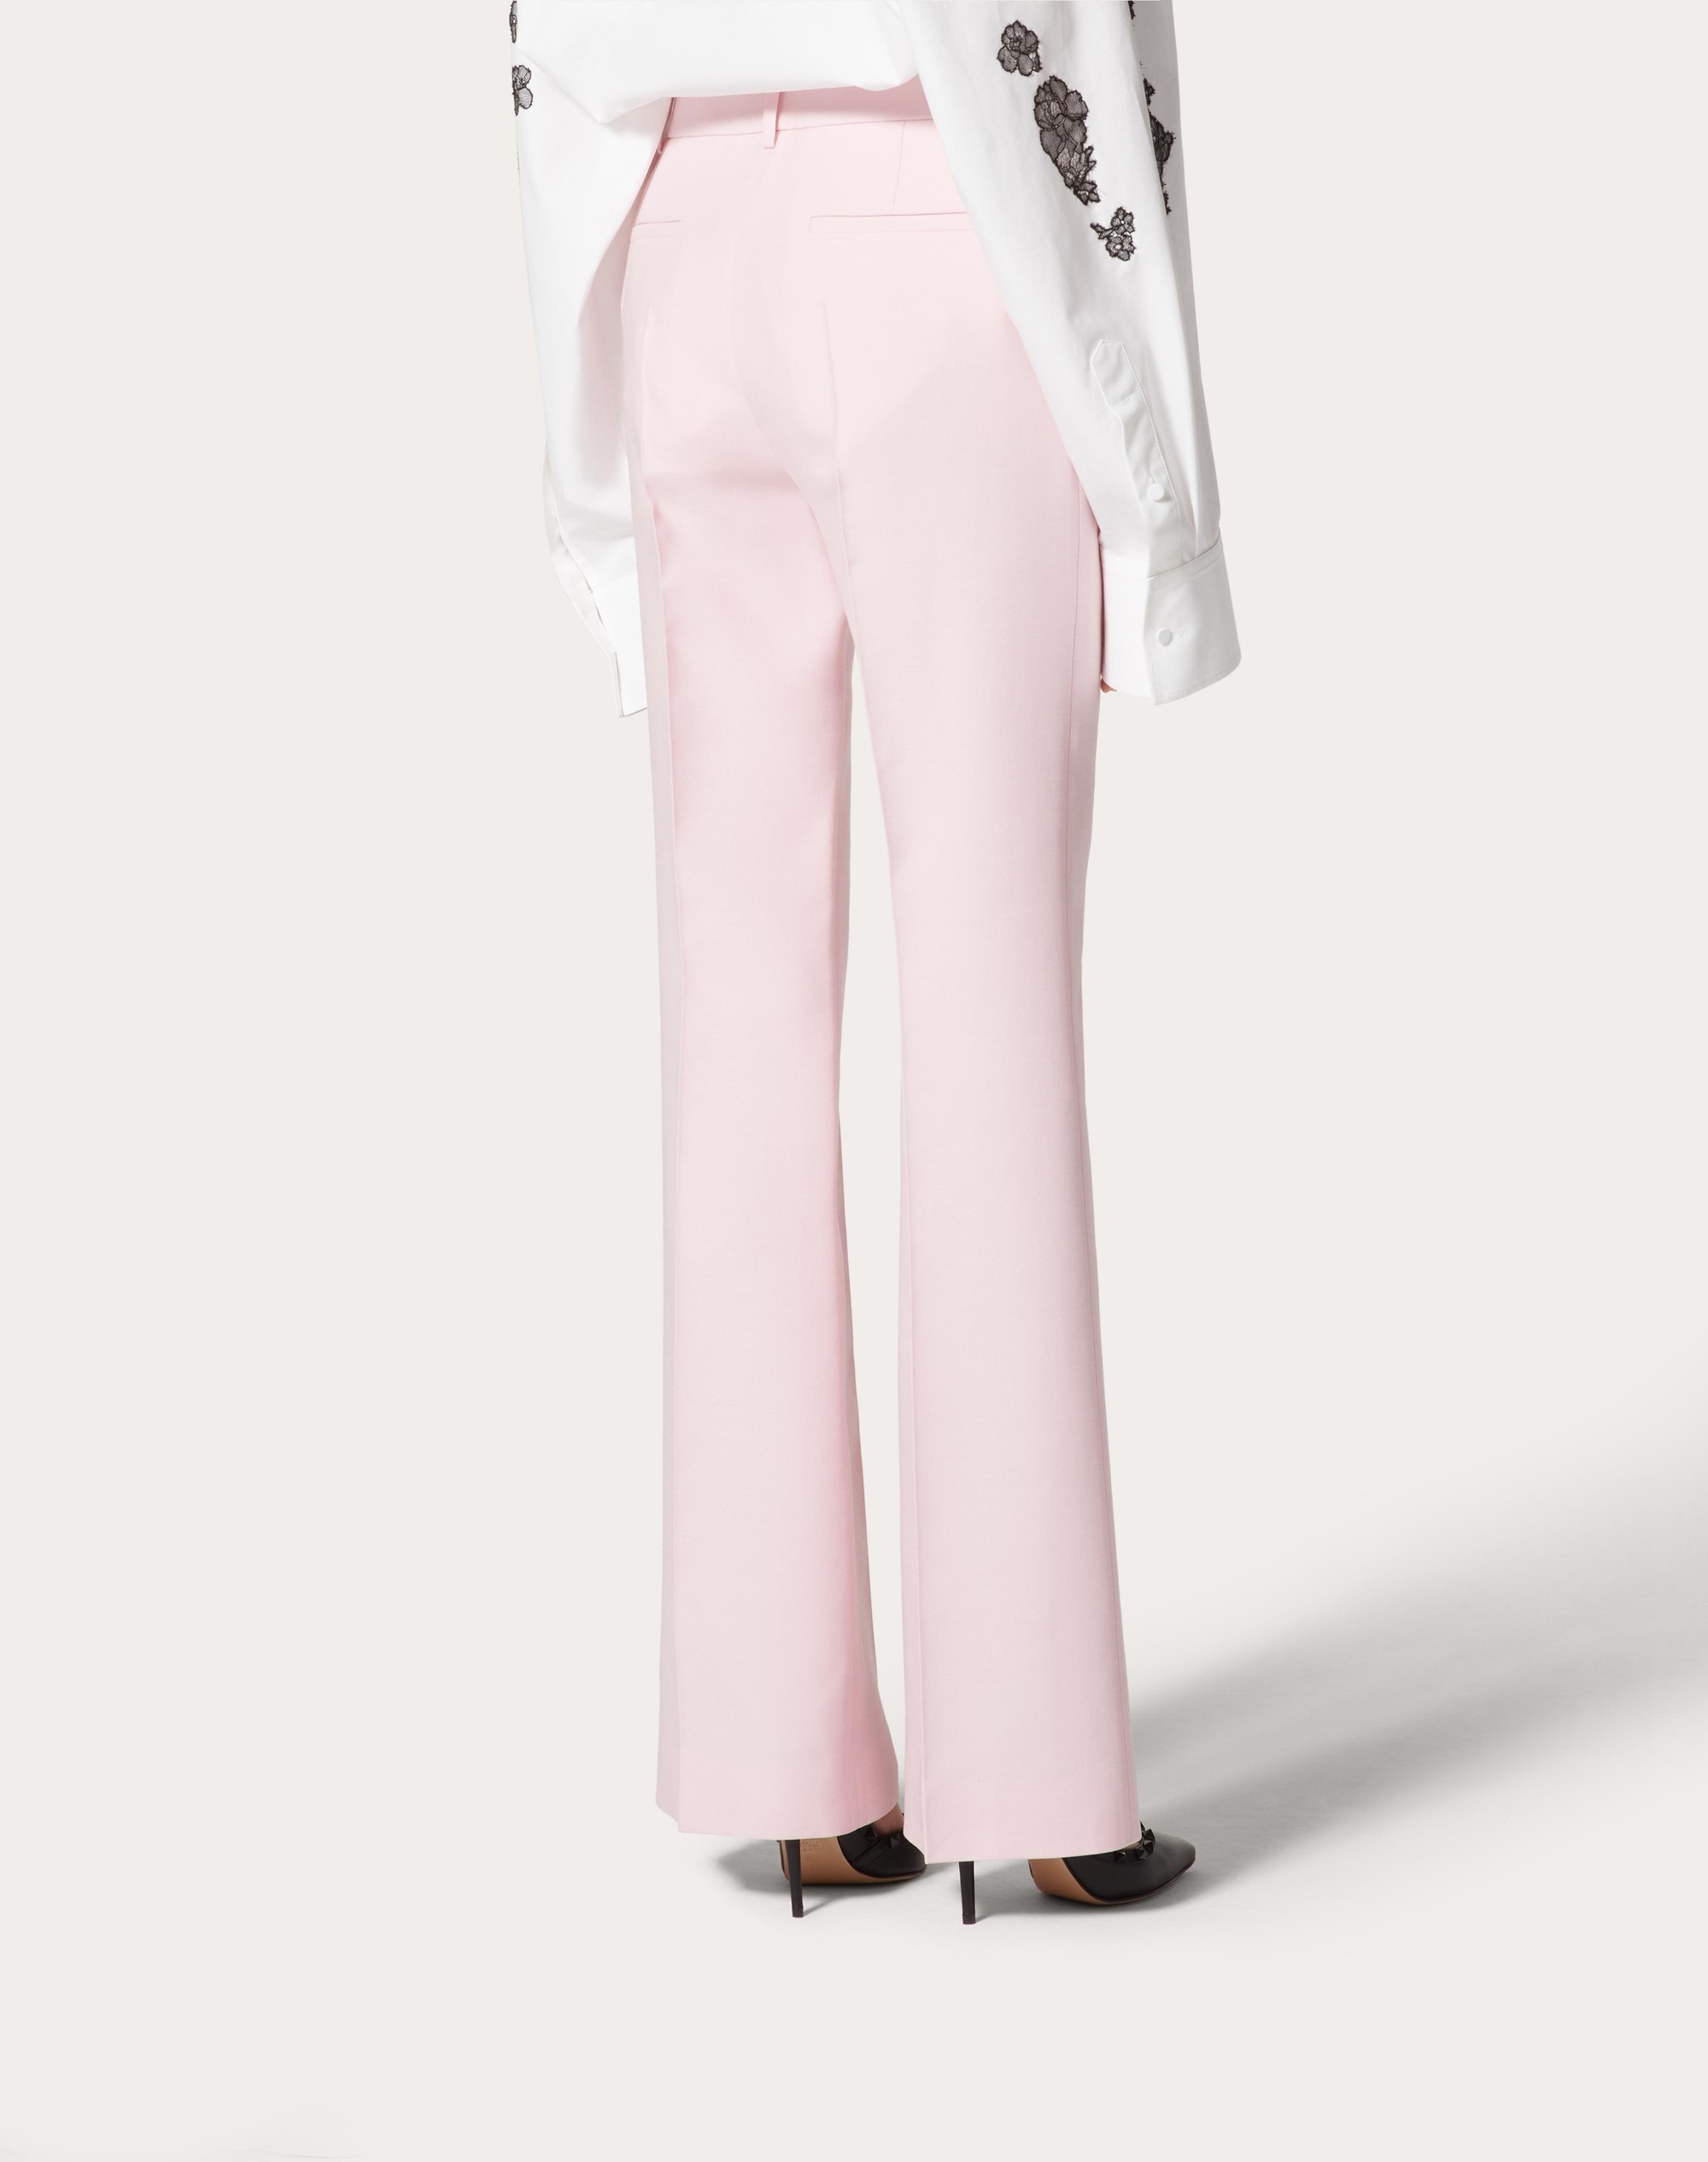 CREPE COUTURE TROUSERS - 4